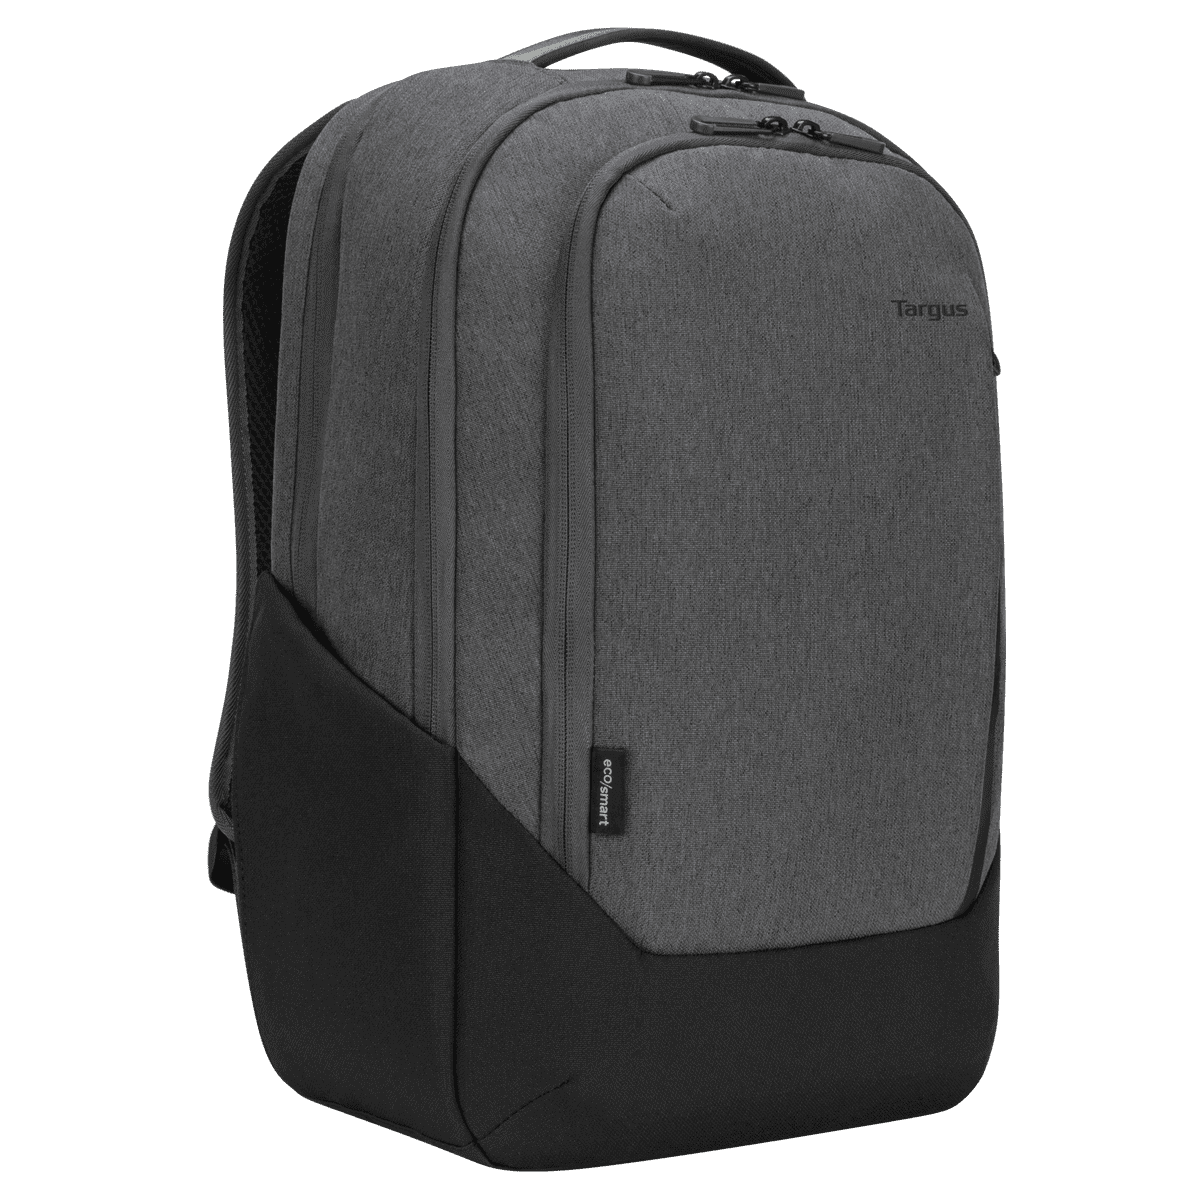 Light Gray TBB58602GL Targus Cypress Hero Backpack with EcoSmart Designed for Business Traveler and School fit up to 15.6-Inch Laptop//Notebook